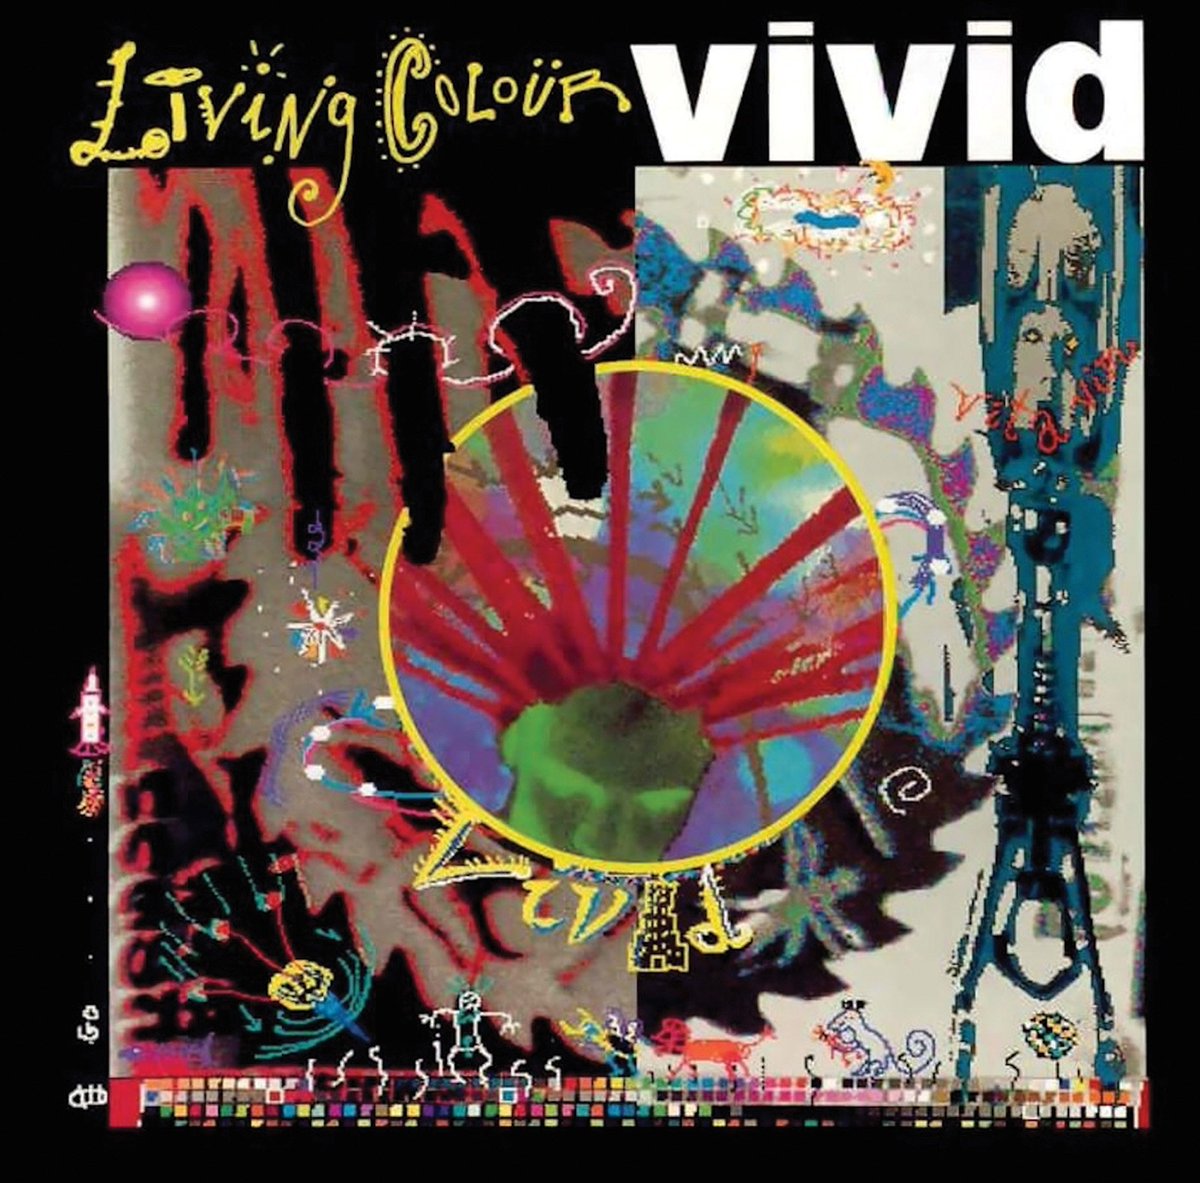 Living Colour Today Marks The 30th Anniversary Of Vivid May 3 19 We D Like To Thank Everyone Involved In Creating This Album A Million Thanks To Our Family Fans